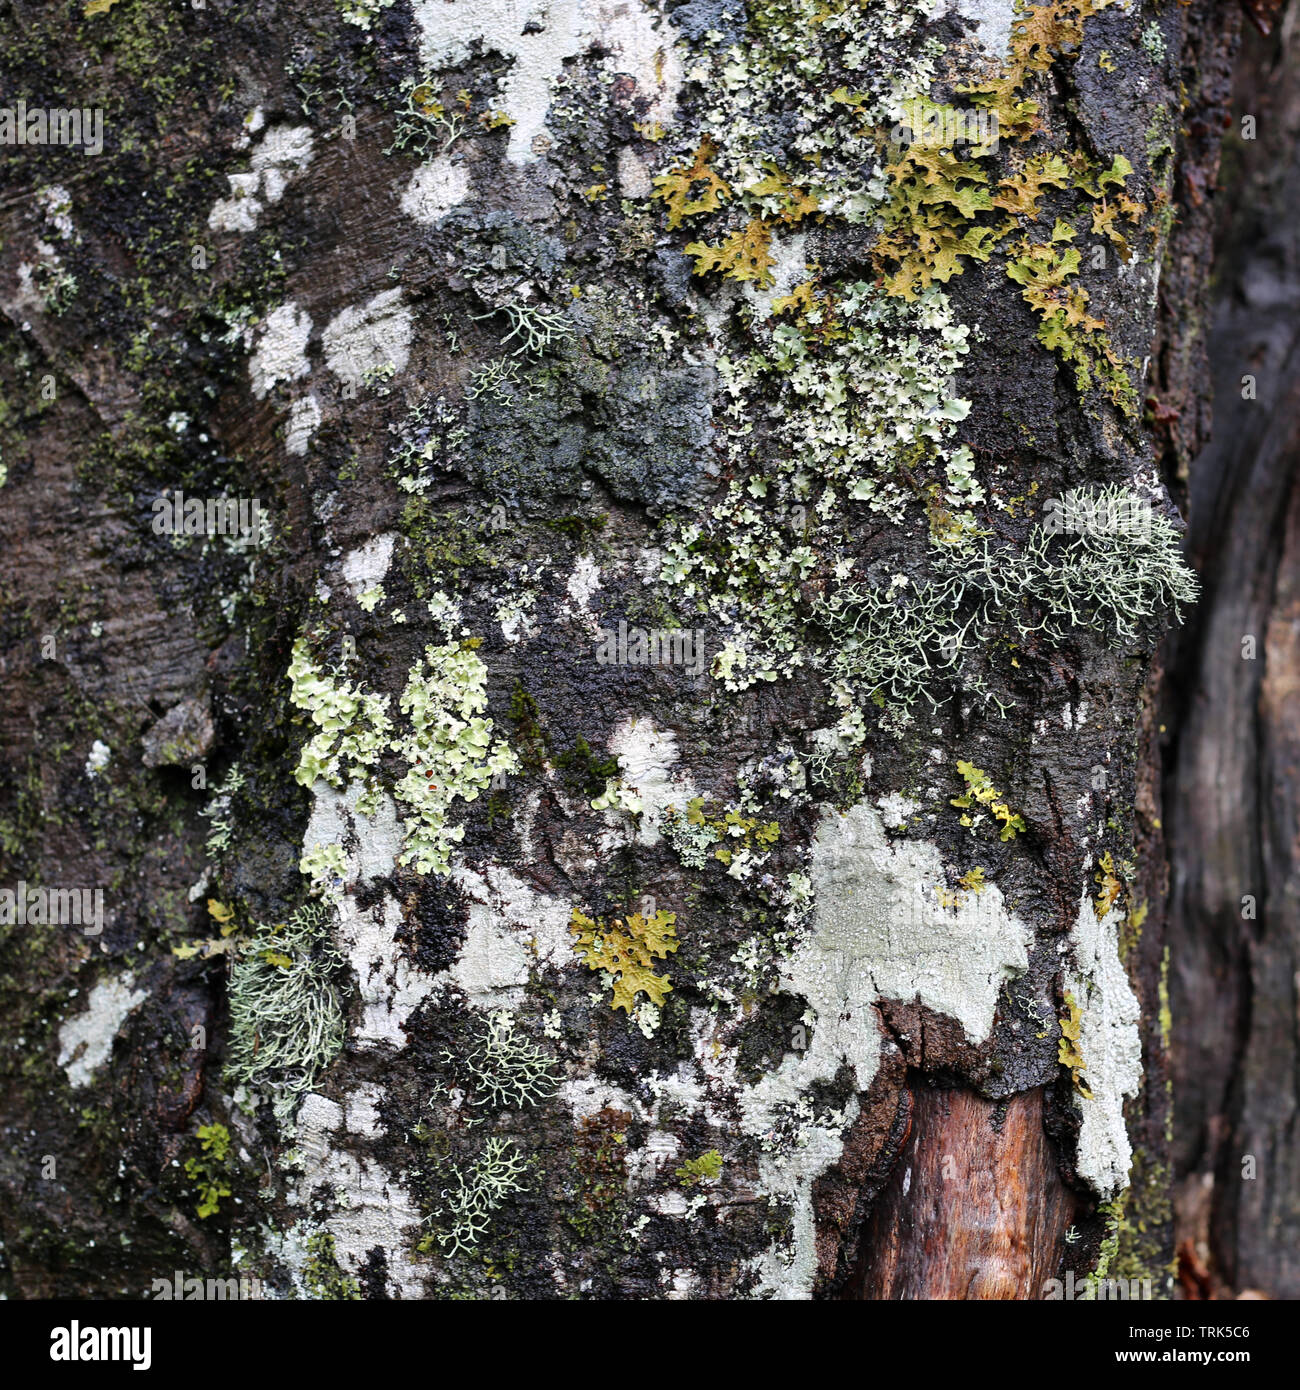 Texture of a tree trunk with a lot of white, grey and orange lichen growing on it. Photographed in the forests of the island of Madeira, Portugal. Stock Photo